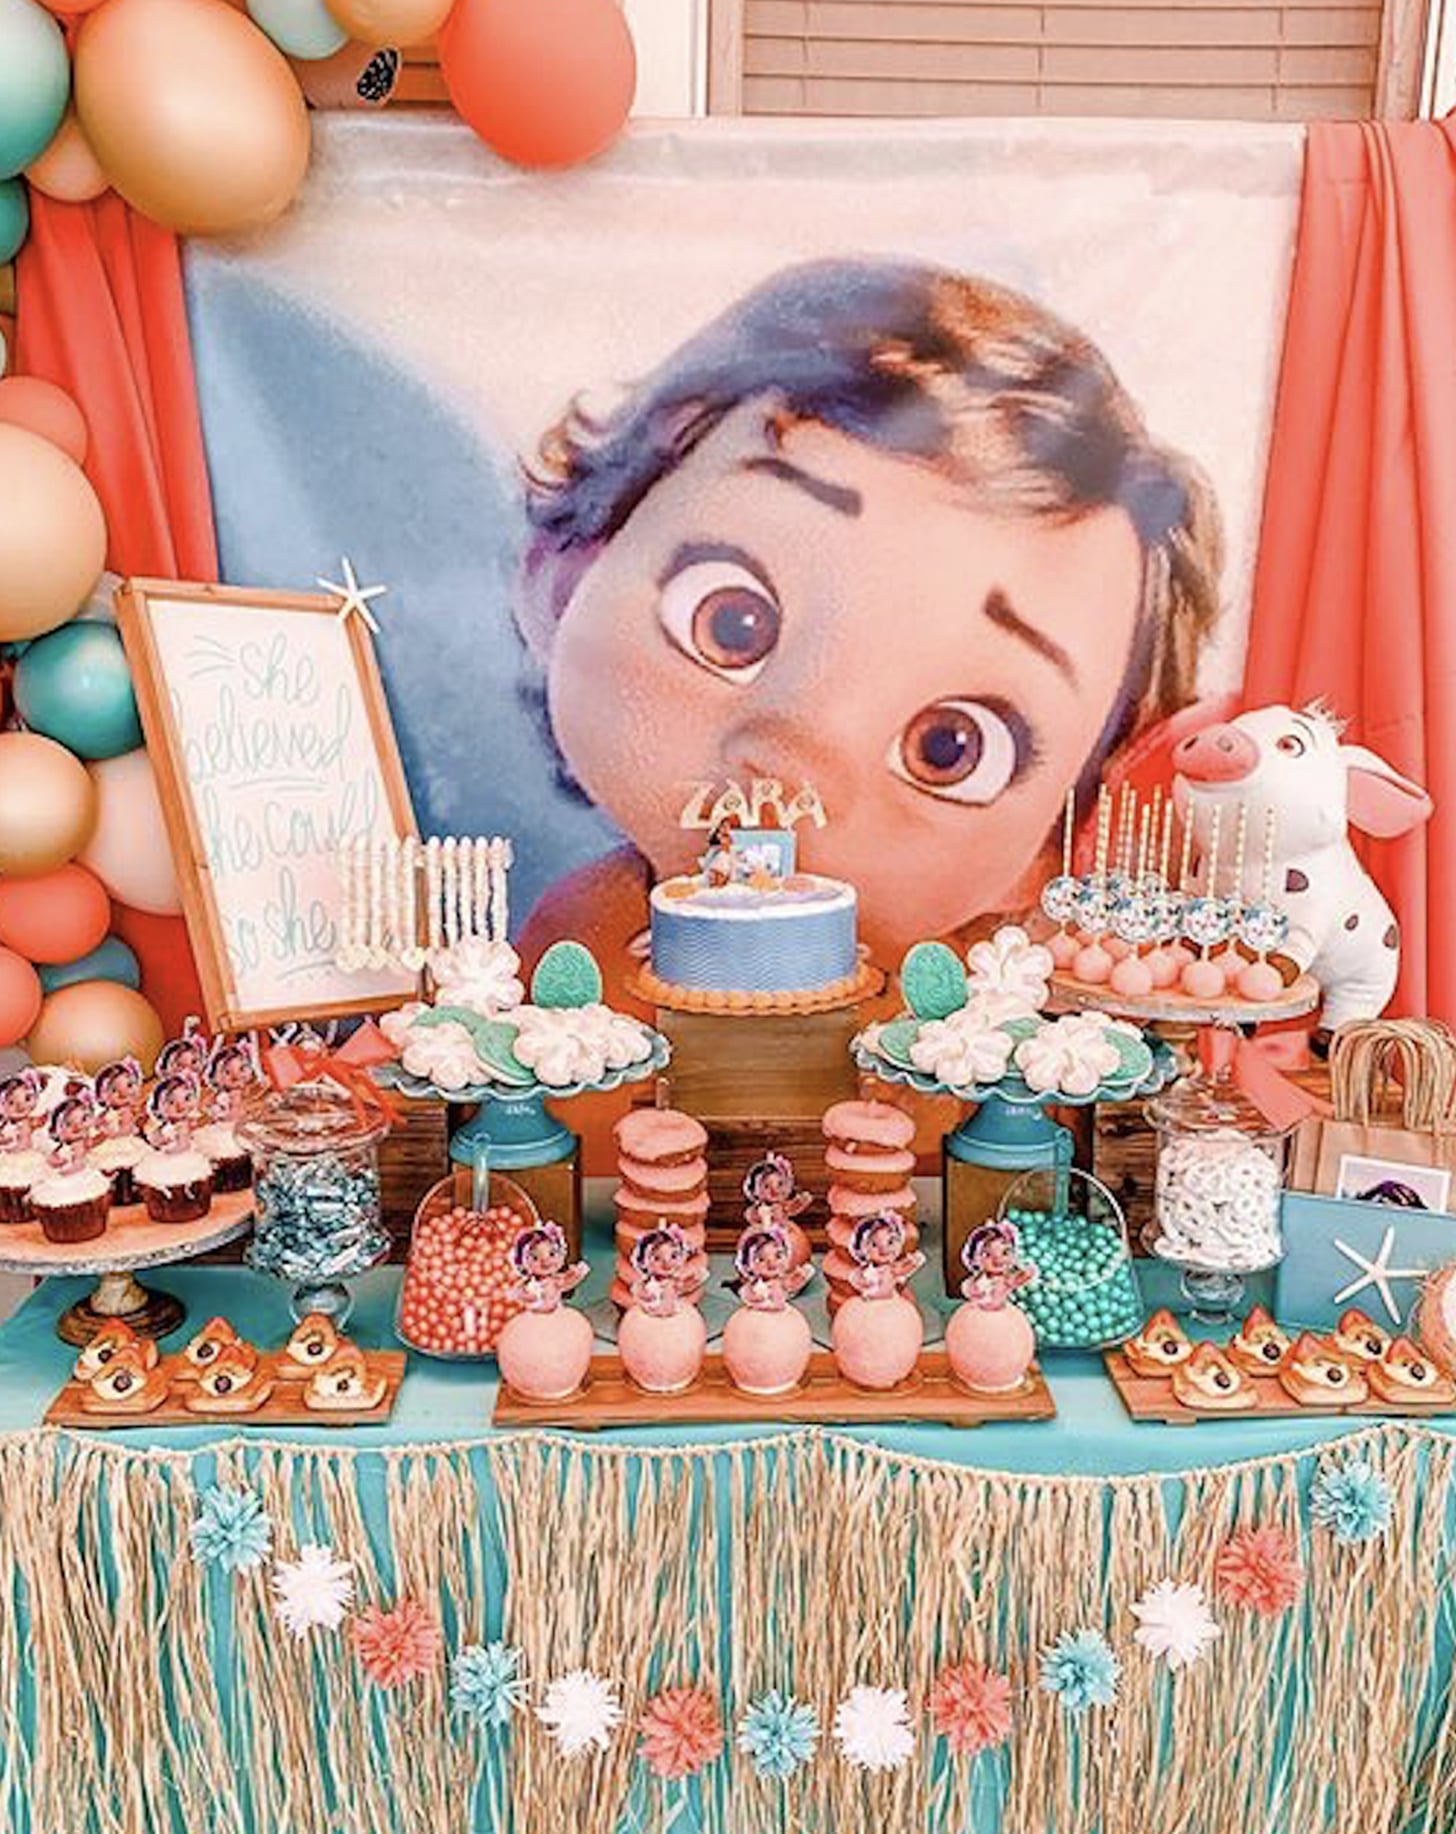 15 Winter Birthday Party Ideas That Are Seriously Fun